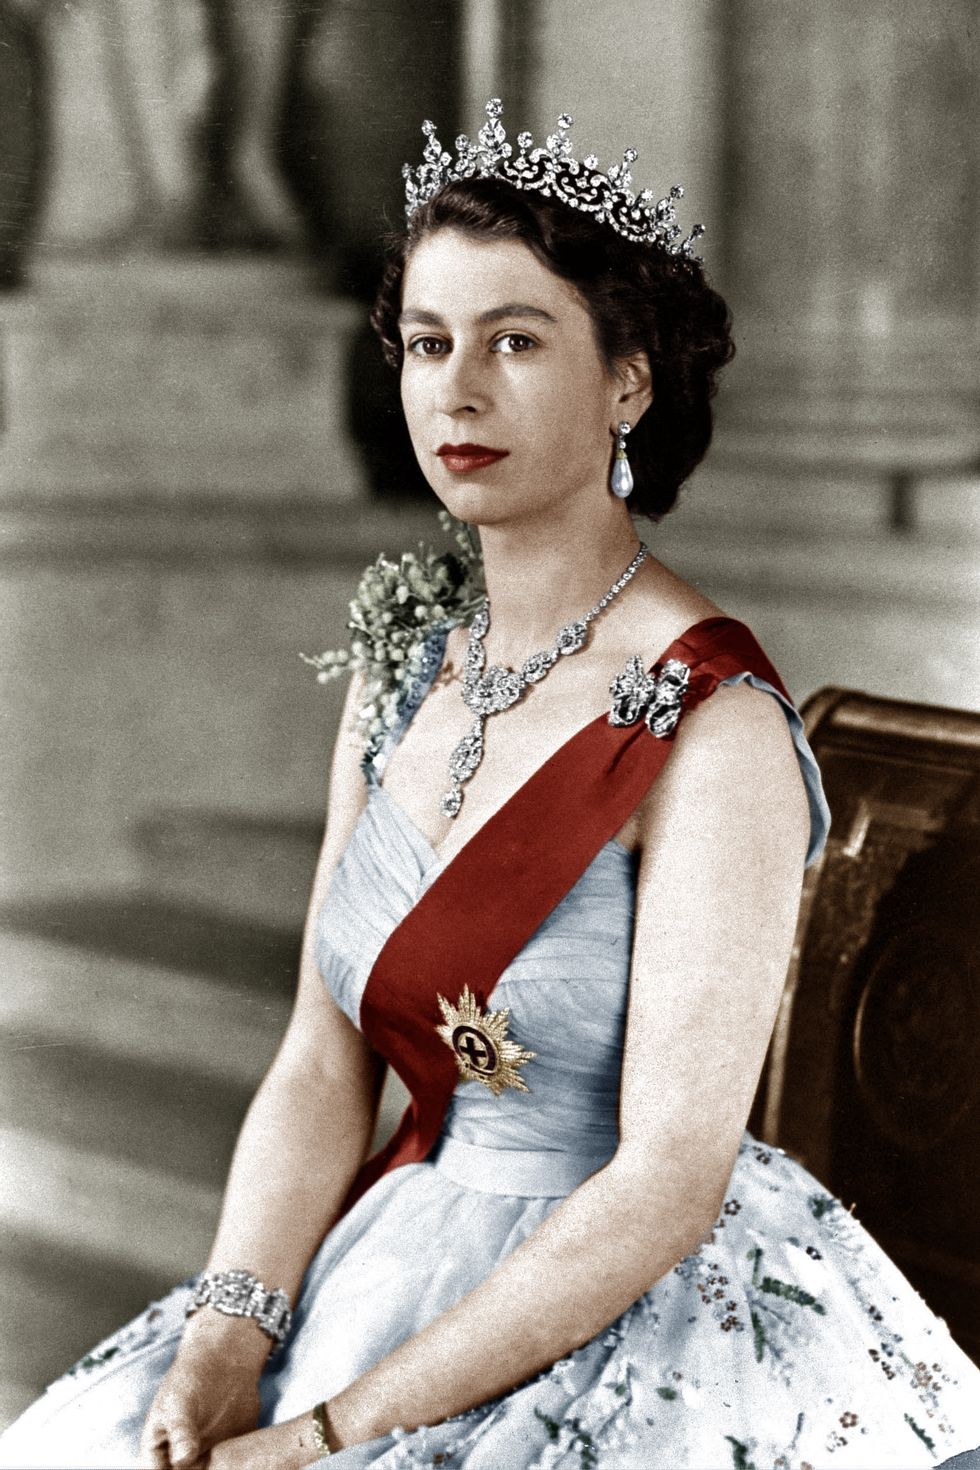 La reine Elisabeth II d'Angleterre (n1926, fille de GeorgeVI) ici le 6 fevrier 1952, il s'agit d'une photo officielle lors de son accession au trone anglais -- queen Elizabeth II of England (b1926 daughter of GeorgeVI) here in february 1952, it's an official picture when she acceded to the throne colorized document